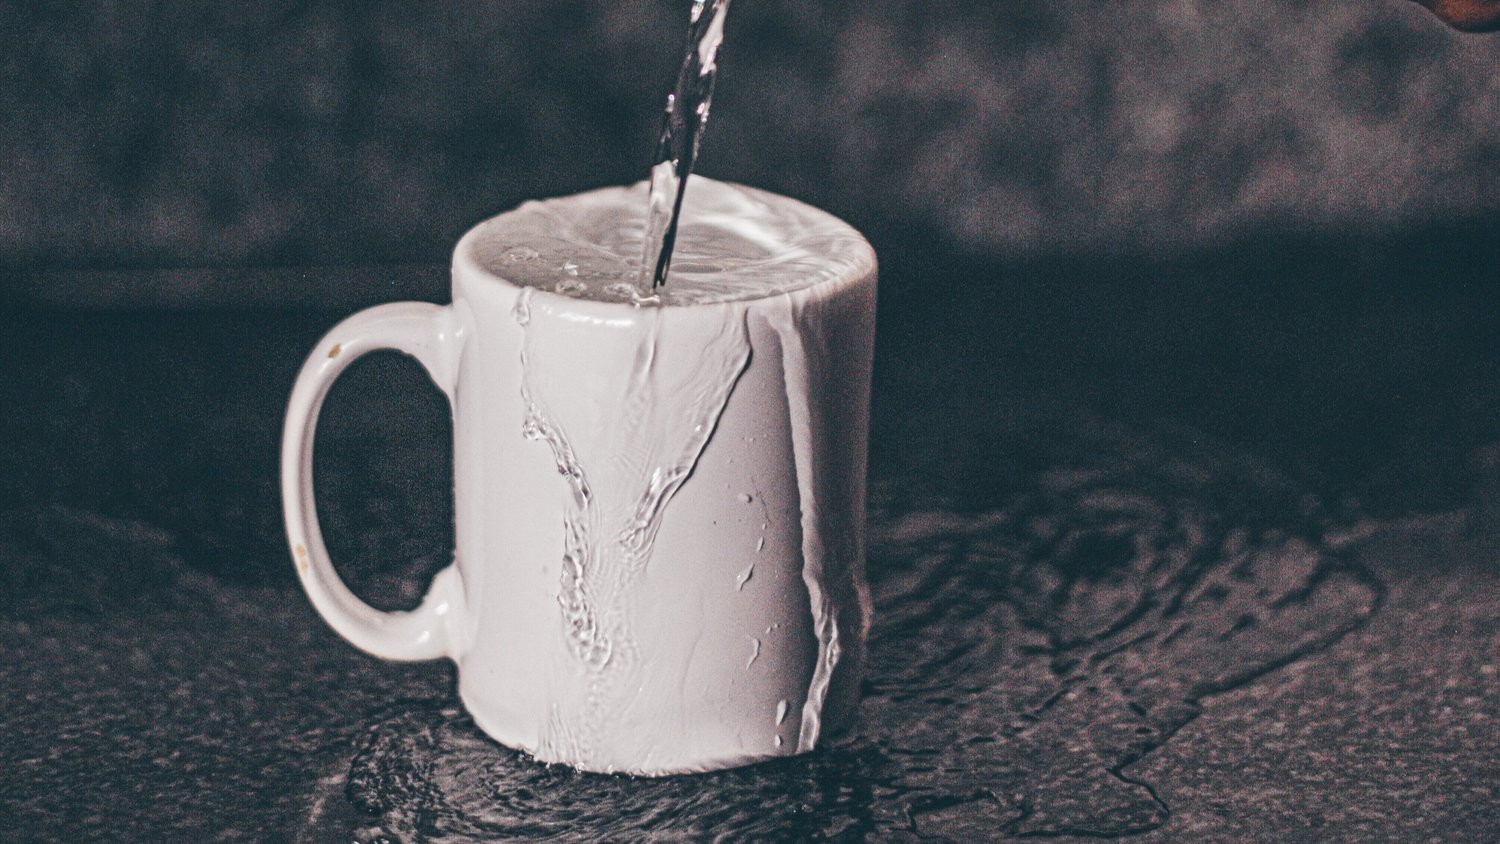 Photo by Luis Pimenttel: https://www.pexels.com/photo/person-pouring-water-on-white-ceramic-mug-9635654/